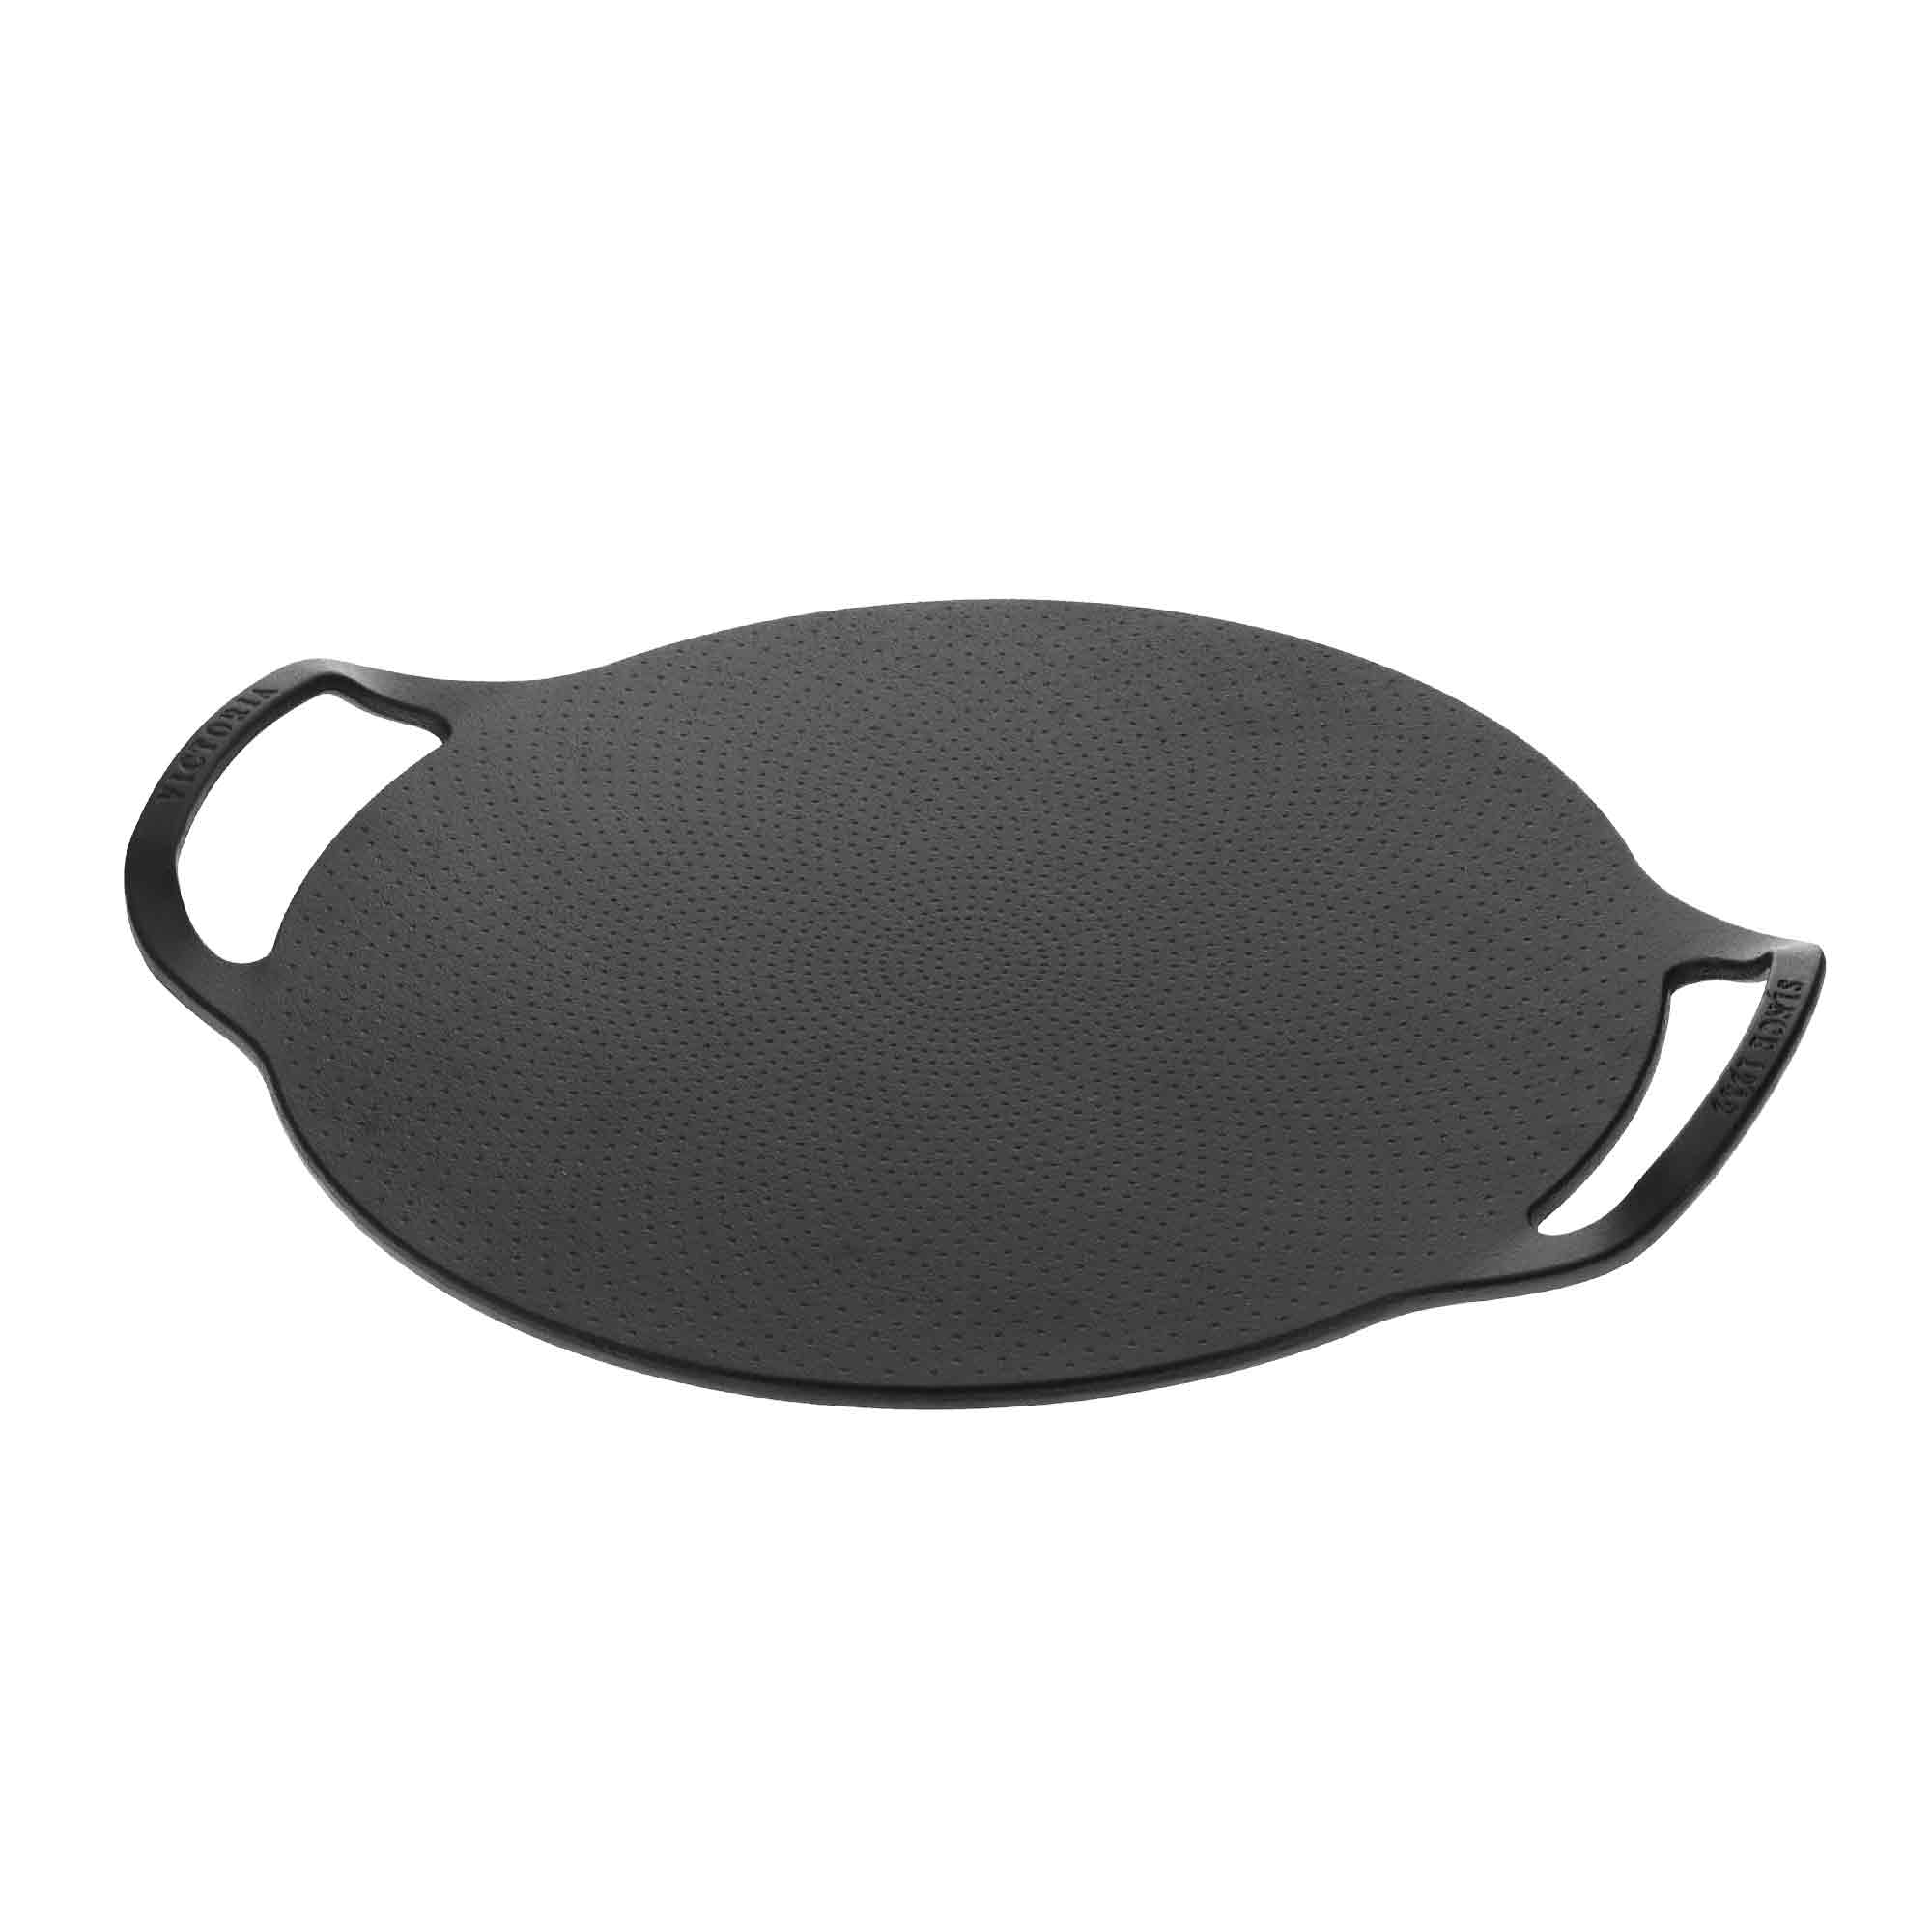 Victoria Cast-Iron Skillet, Pre-Seasoned Cast-Iron Frying Pan with Long  Handle, Made in Colombia, 12 Inch & Silicone Cast Iron Handle Cover. for 10  to